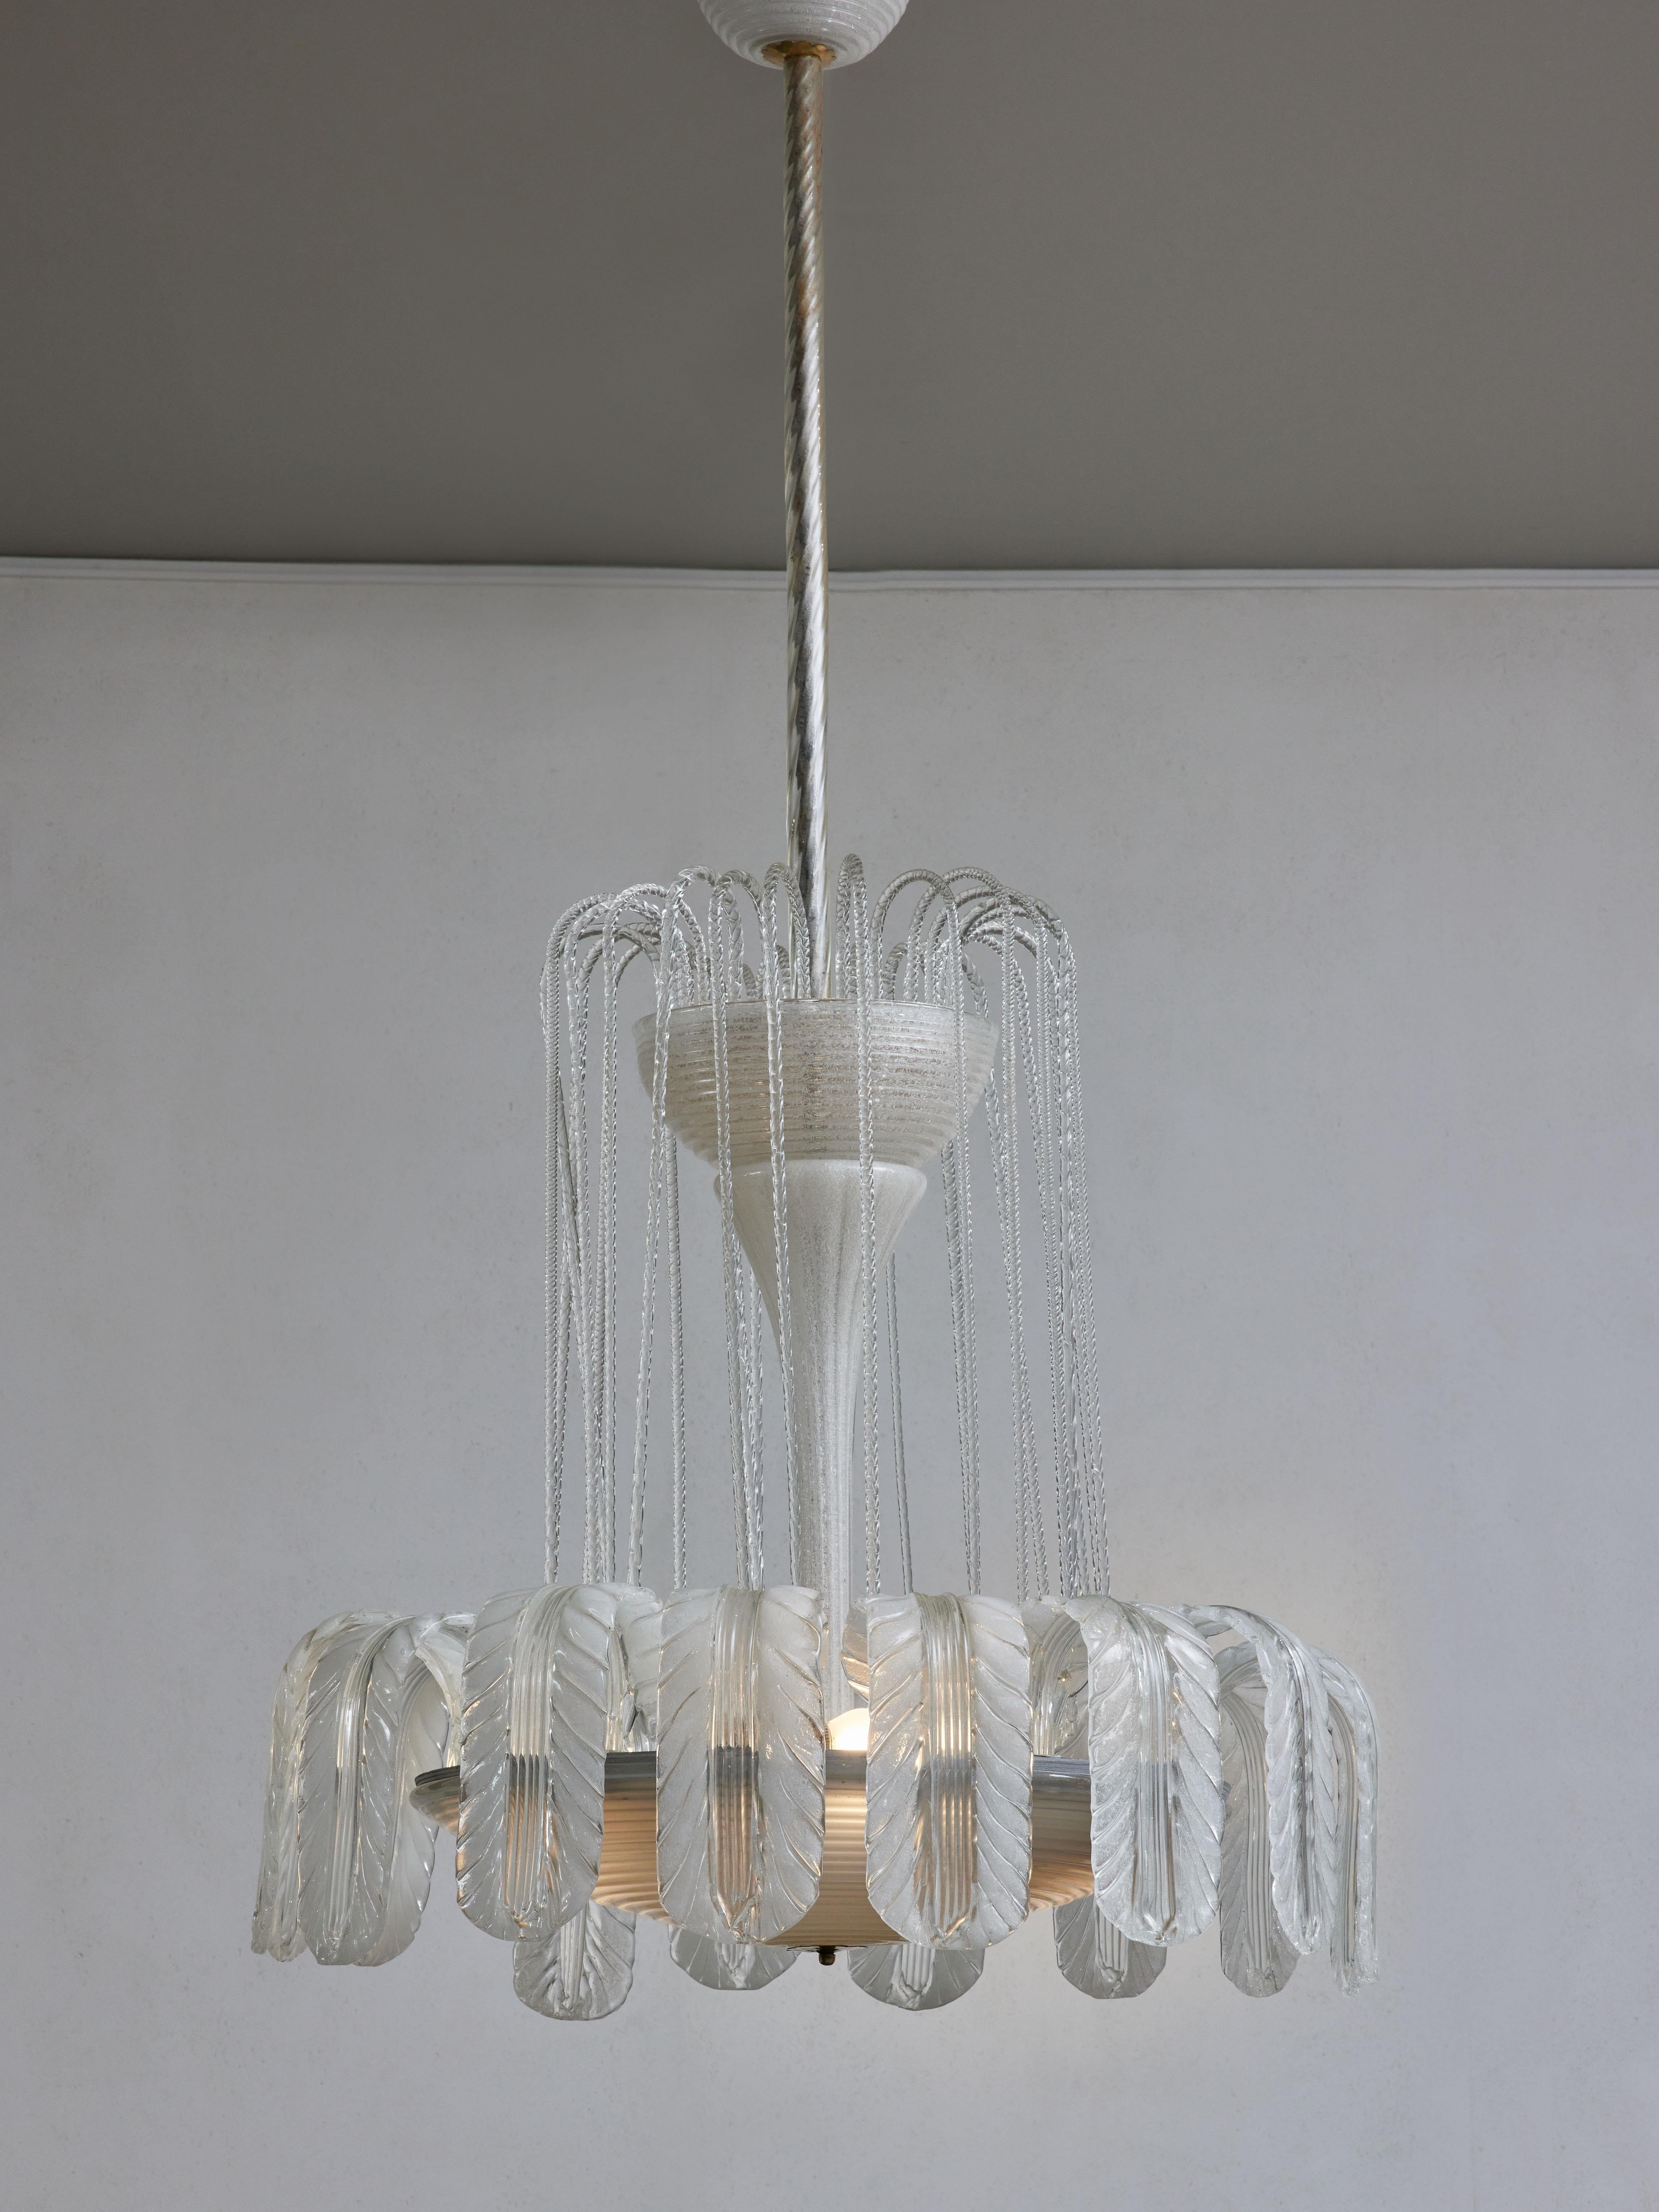 Stunning vintage chandelier from the 1930s in Murano glass and brass settings, by Barovier.
Several handmade delicate parts compose this amazing piece, ribbed hand opened clear etched glass canopy and bowls, fluted vertical tube to decorate the